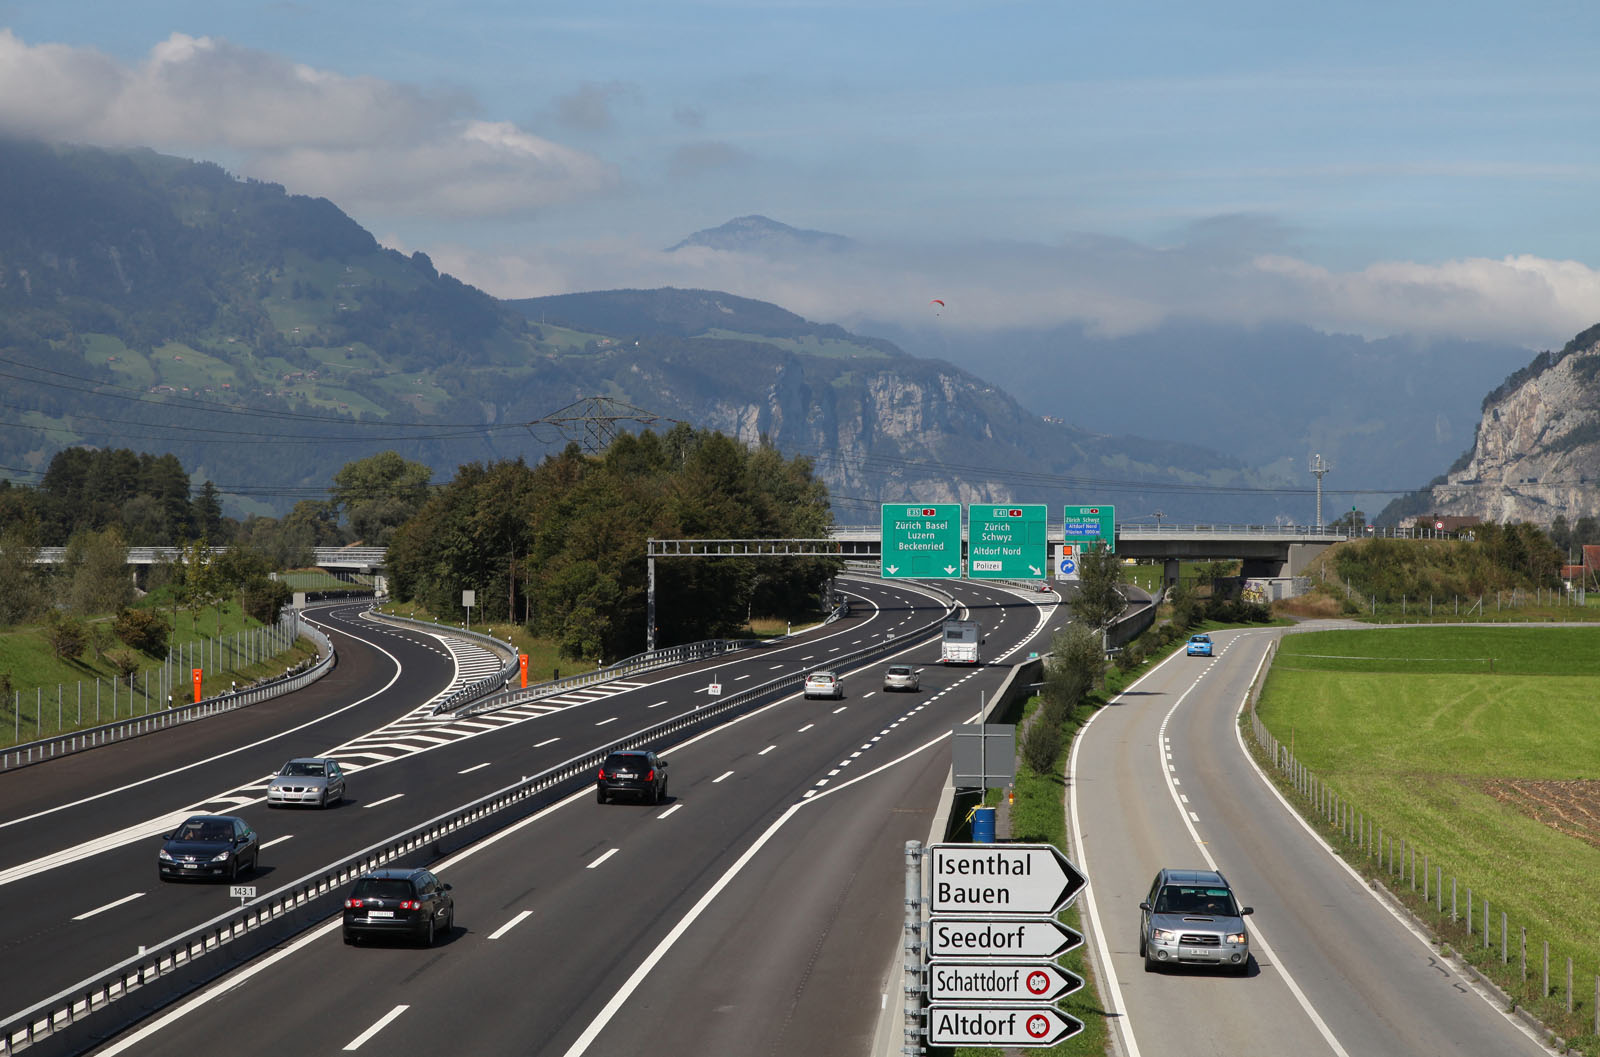 Charges on the German Autobahn - we learned the details